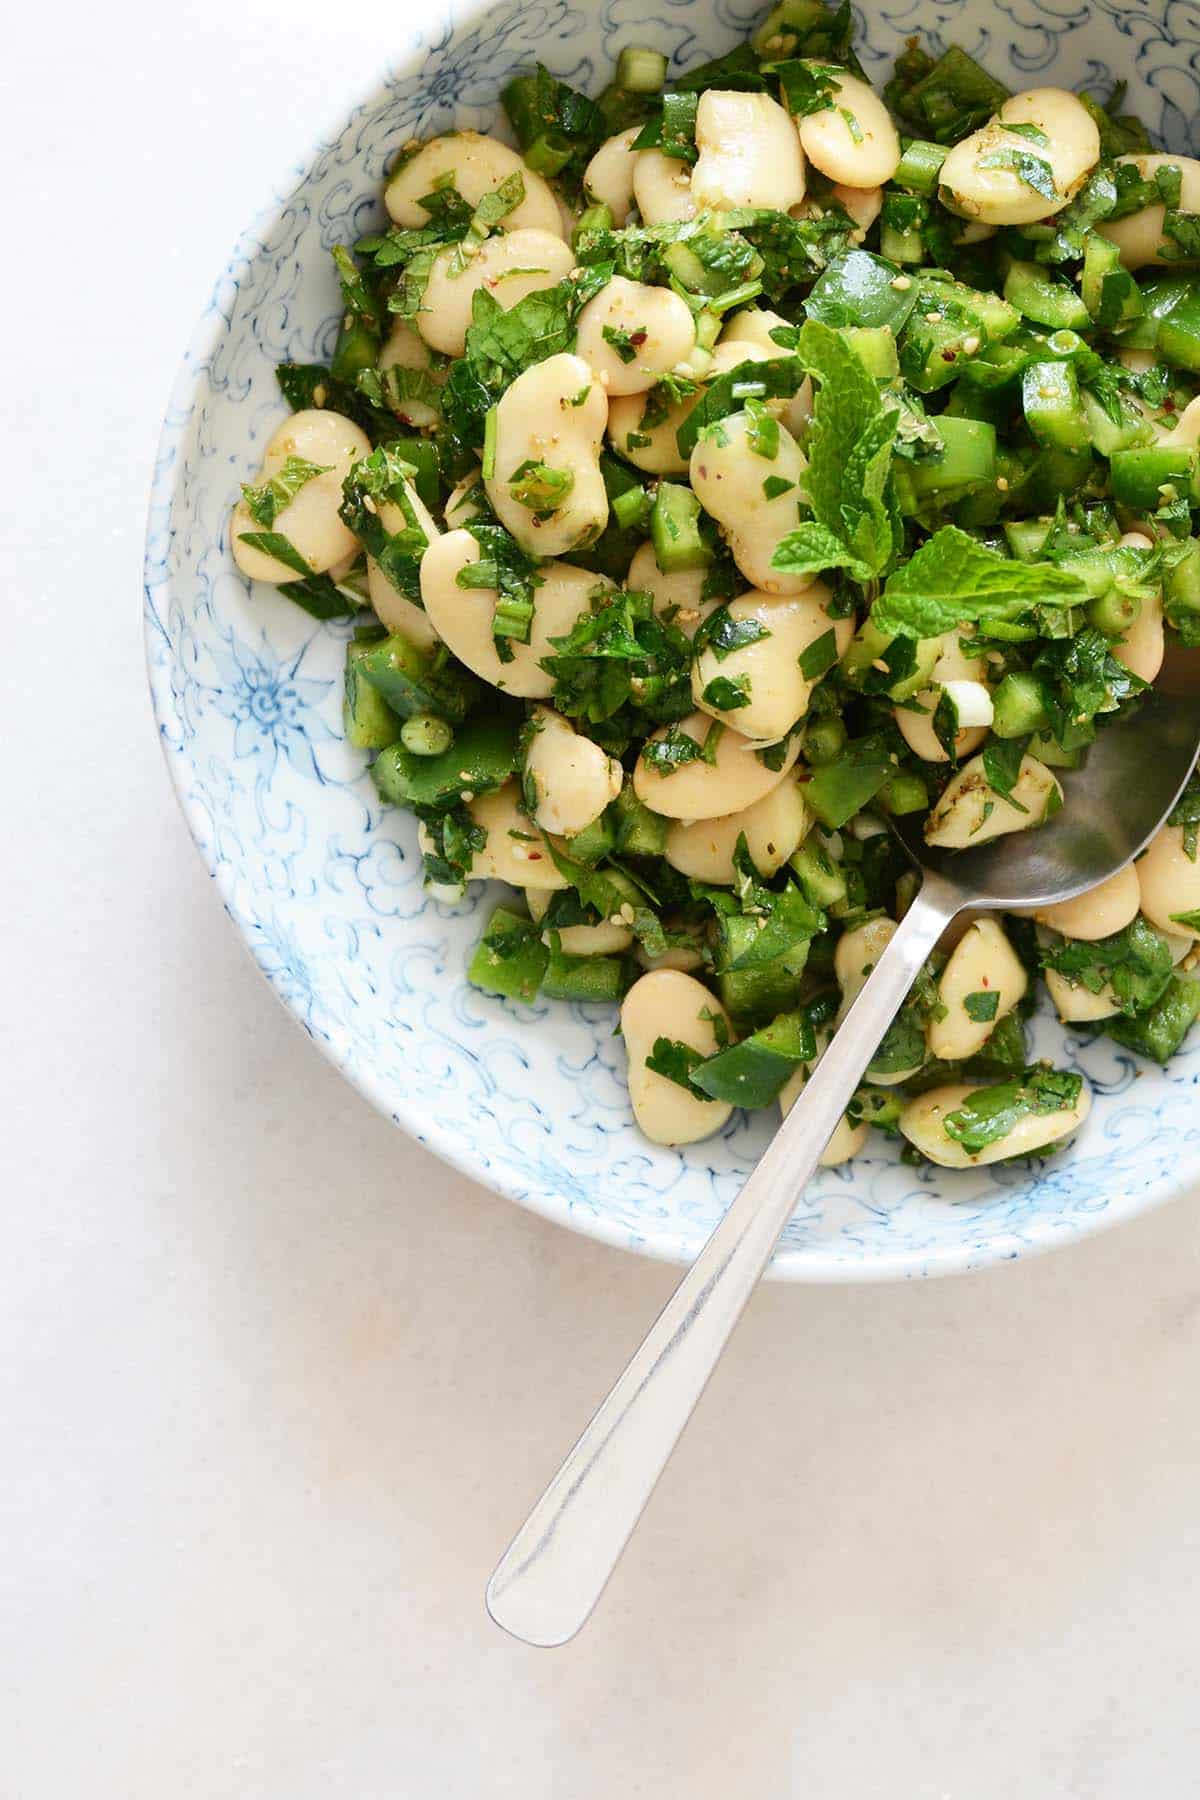 vegan butter bean salad in middle eastern bowl on white marble countertop